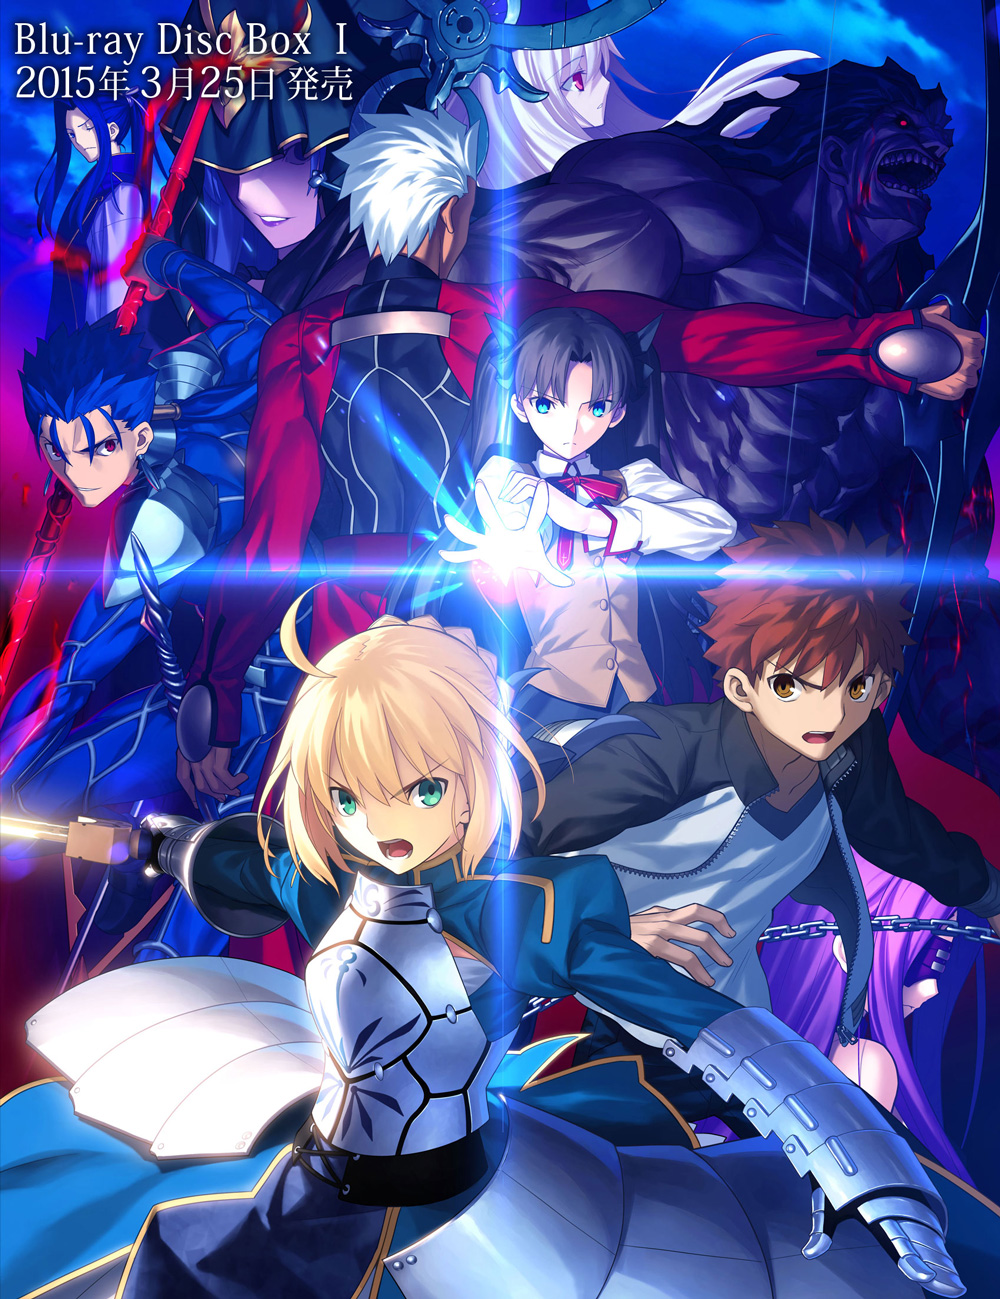 Fate-stay-night-Unlimited-Blade-Works-Blu-ray-Disc-Box-1-Visual